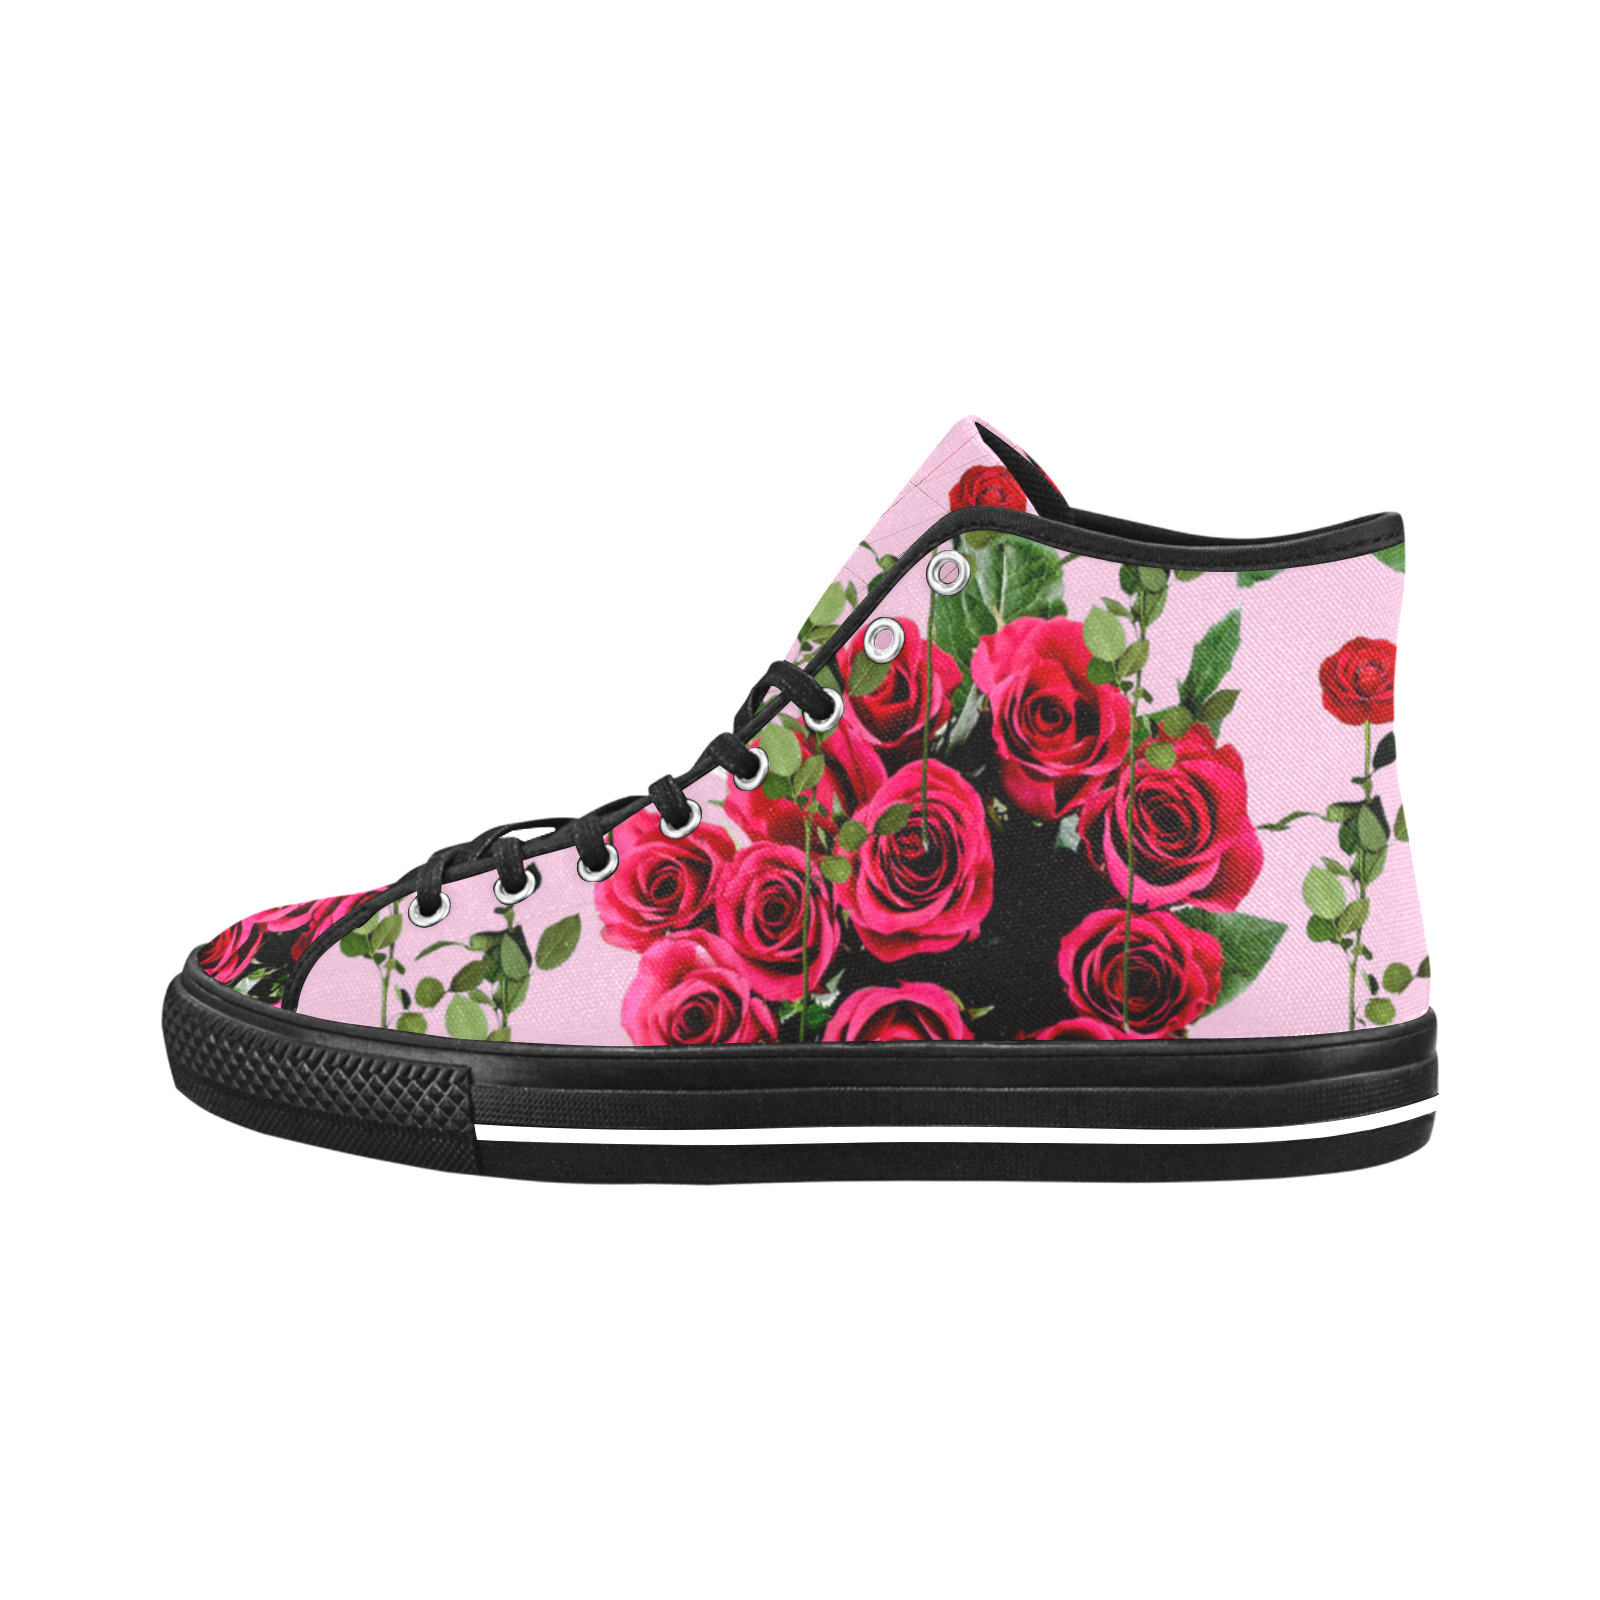 roses pink Vancouver H Women's Canvas Shoes (1013-1)